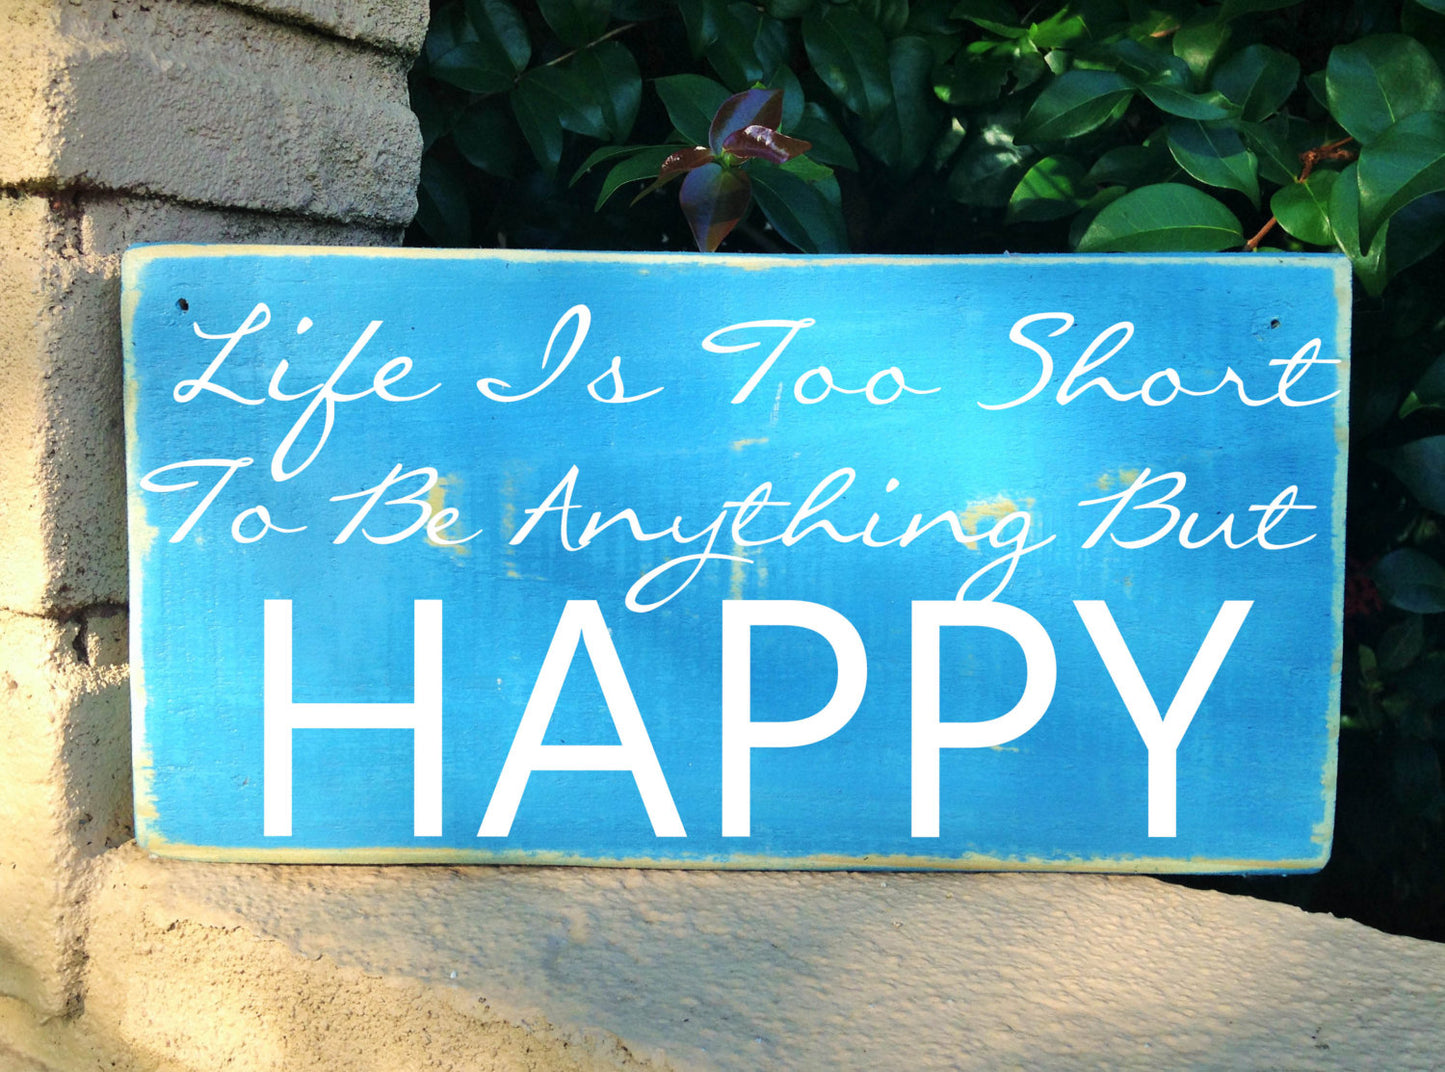 12x6 Life Is Too Short Wood Be Happy Sign